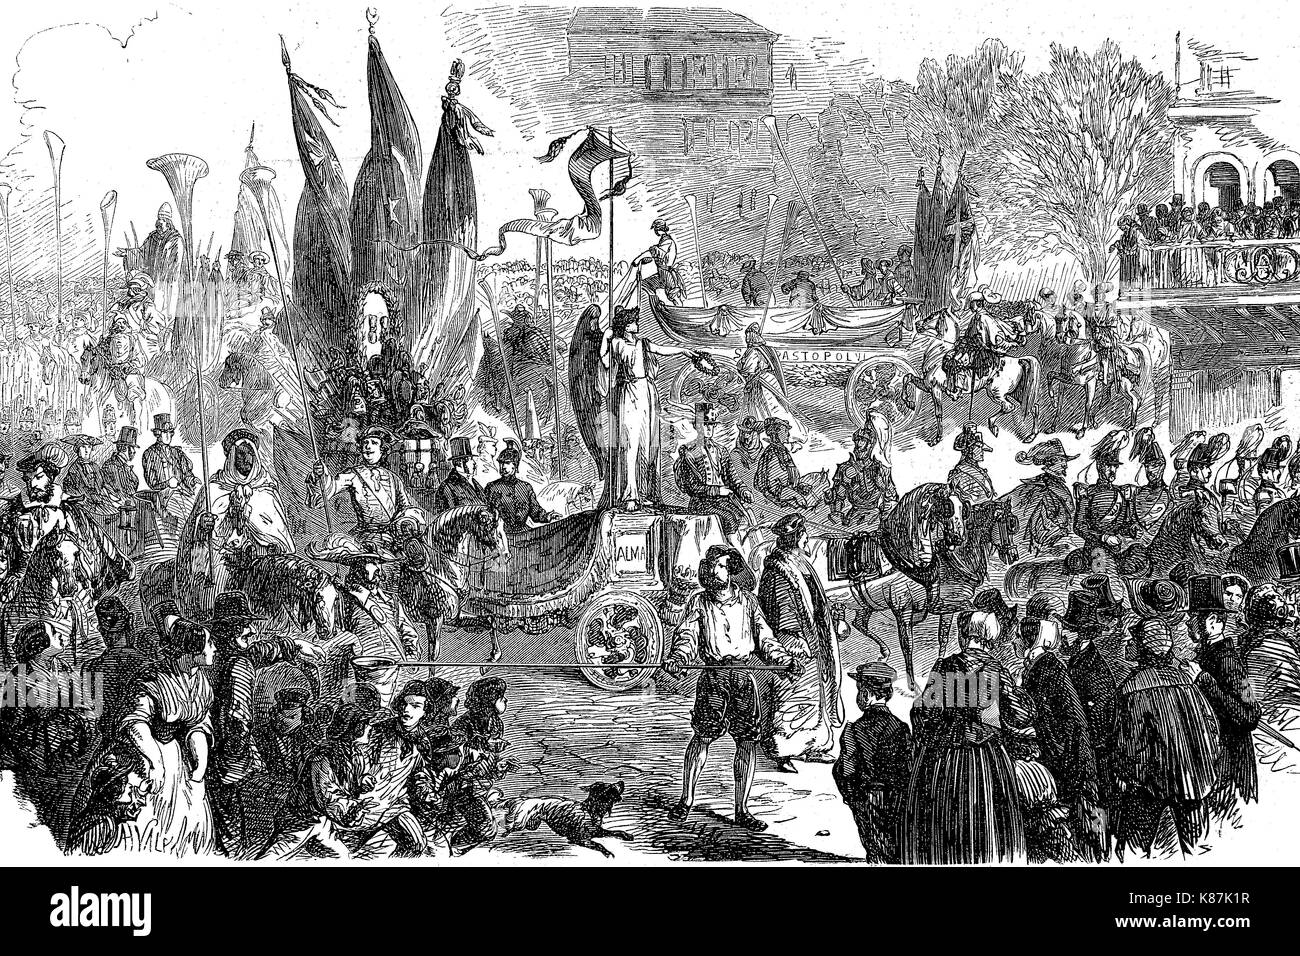 Collection for the Army of the Orient in Toulon, France,  Crimean War, 1855, fundraising, Digital improved reproduction of an original woodprint from the 19th century Stock Photo